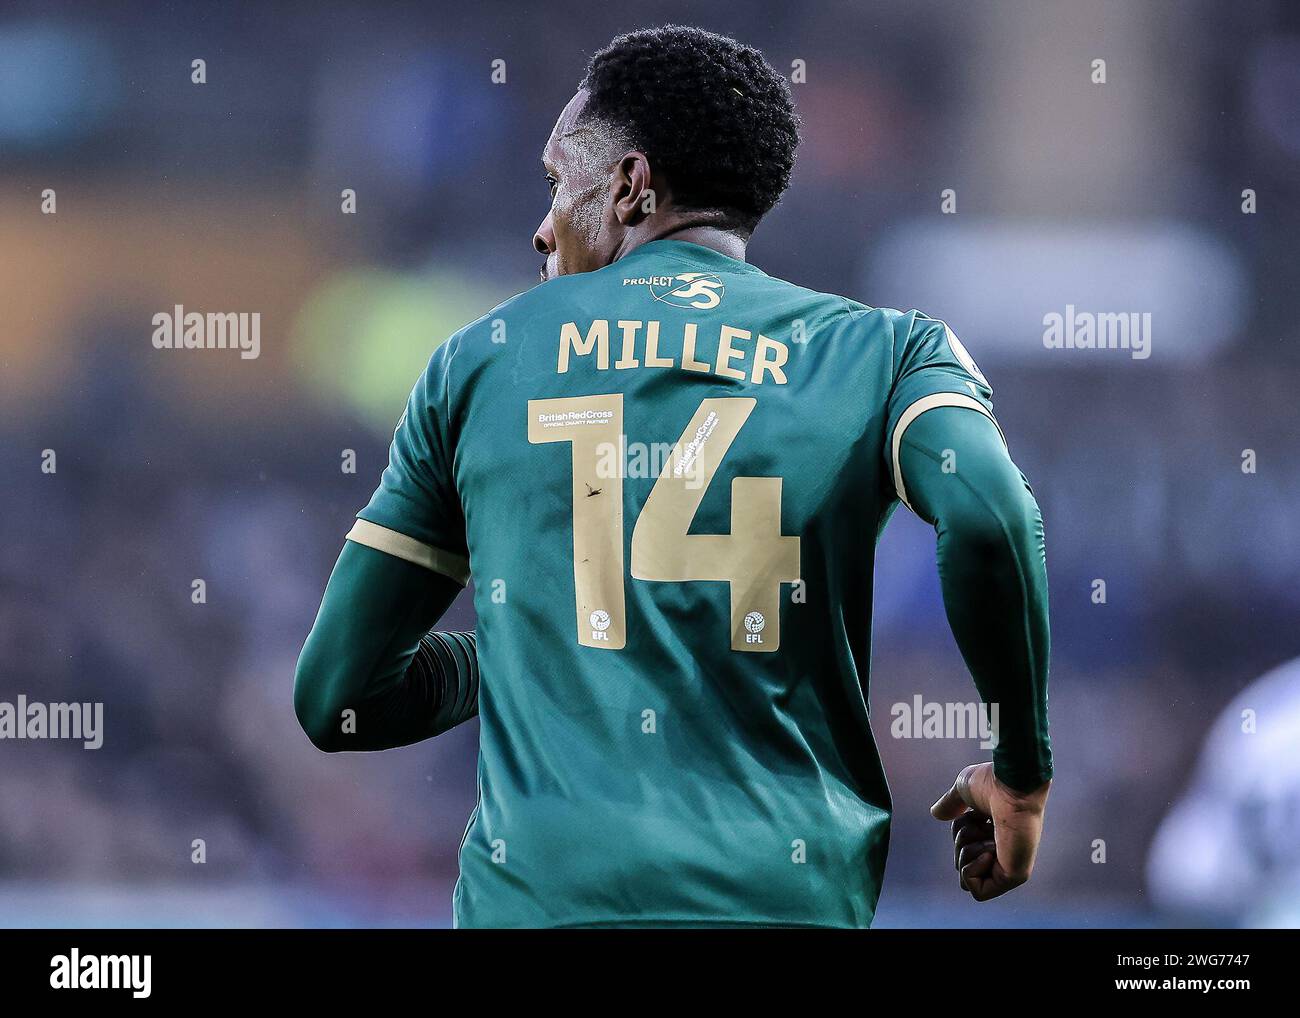 Mickel Miller of Plymouth Argyle  during the Sky Bet Championship match Swansea City vs Plymouth Argyle at Swansea.com Stadium, Swansea, United Kingdom, 3rd February 2024  (Photo by Stan Kasala/News Images) Stock Photo